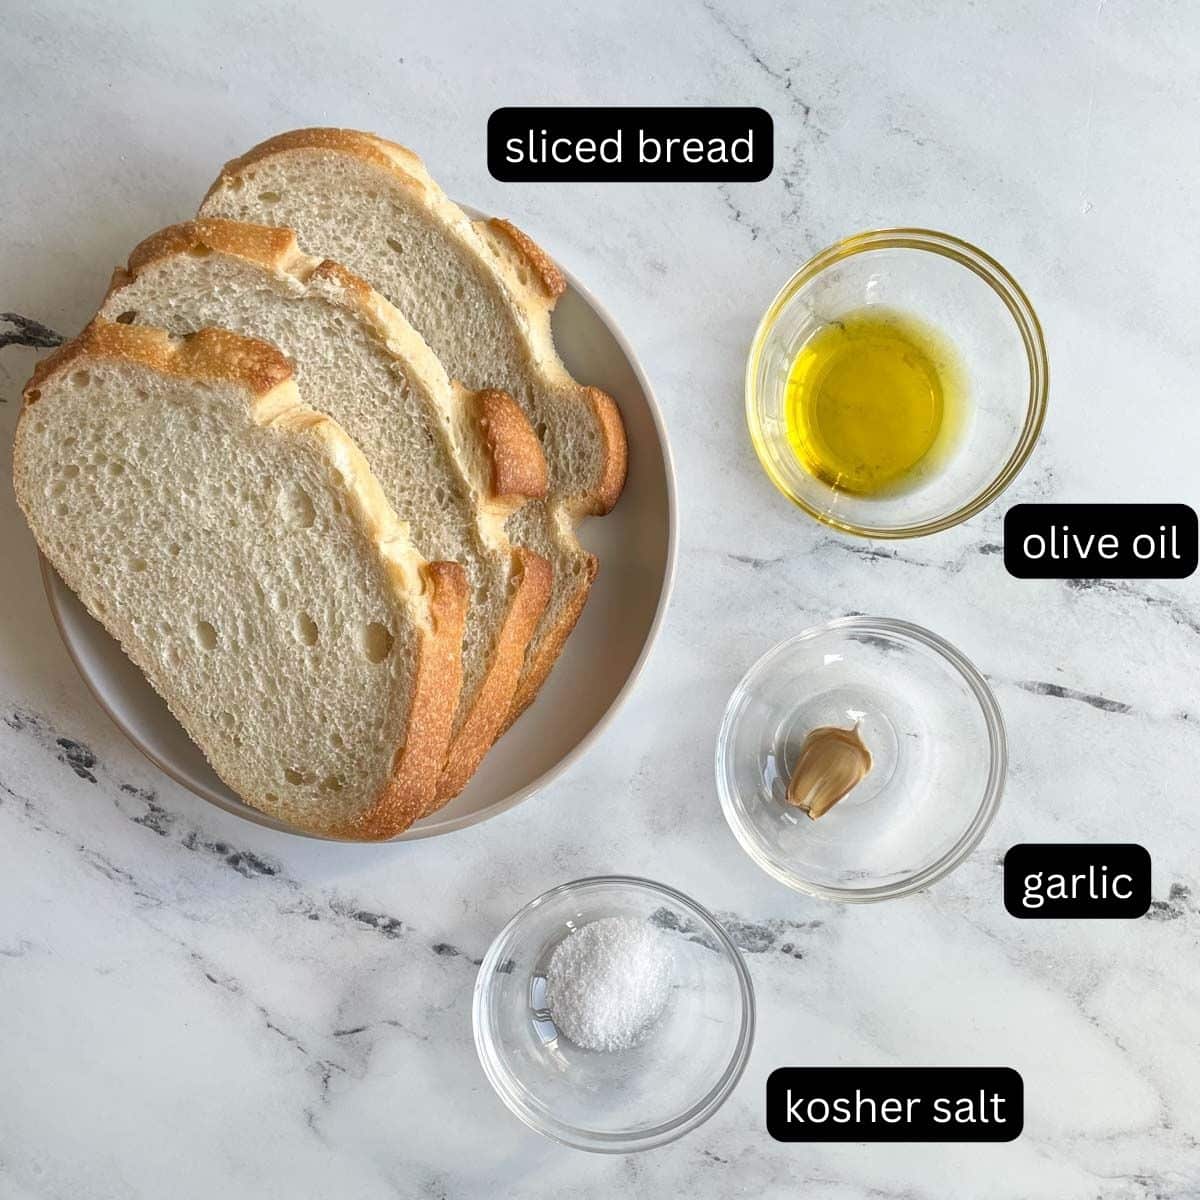 The labeled ingredients for Air Fryer Toast are shown on a white marble counter.